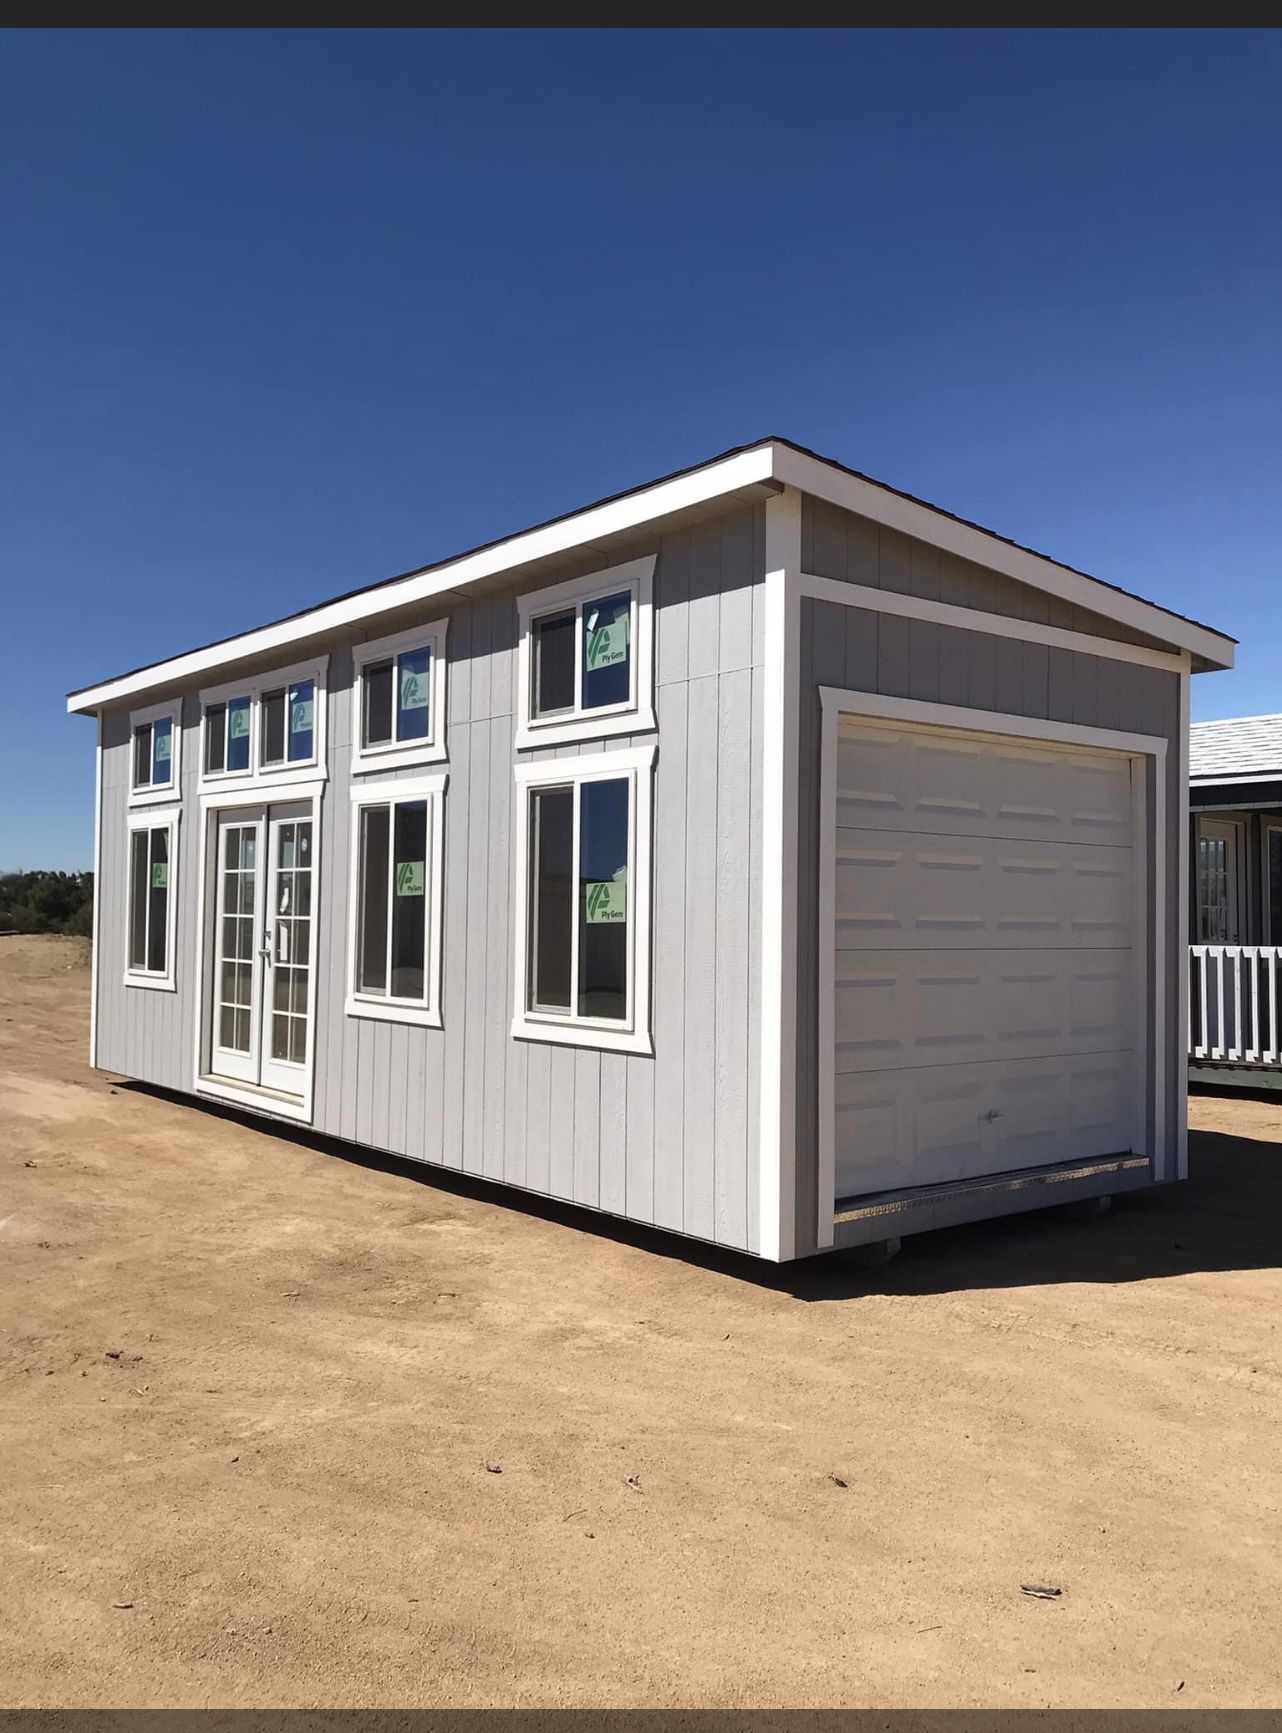 10x 28 Tiny home extra living space Will Consider Trade For Travel Trailer